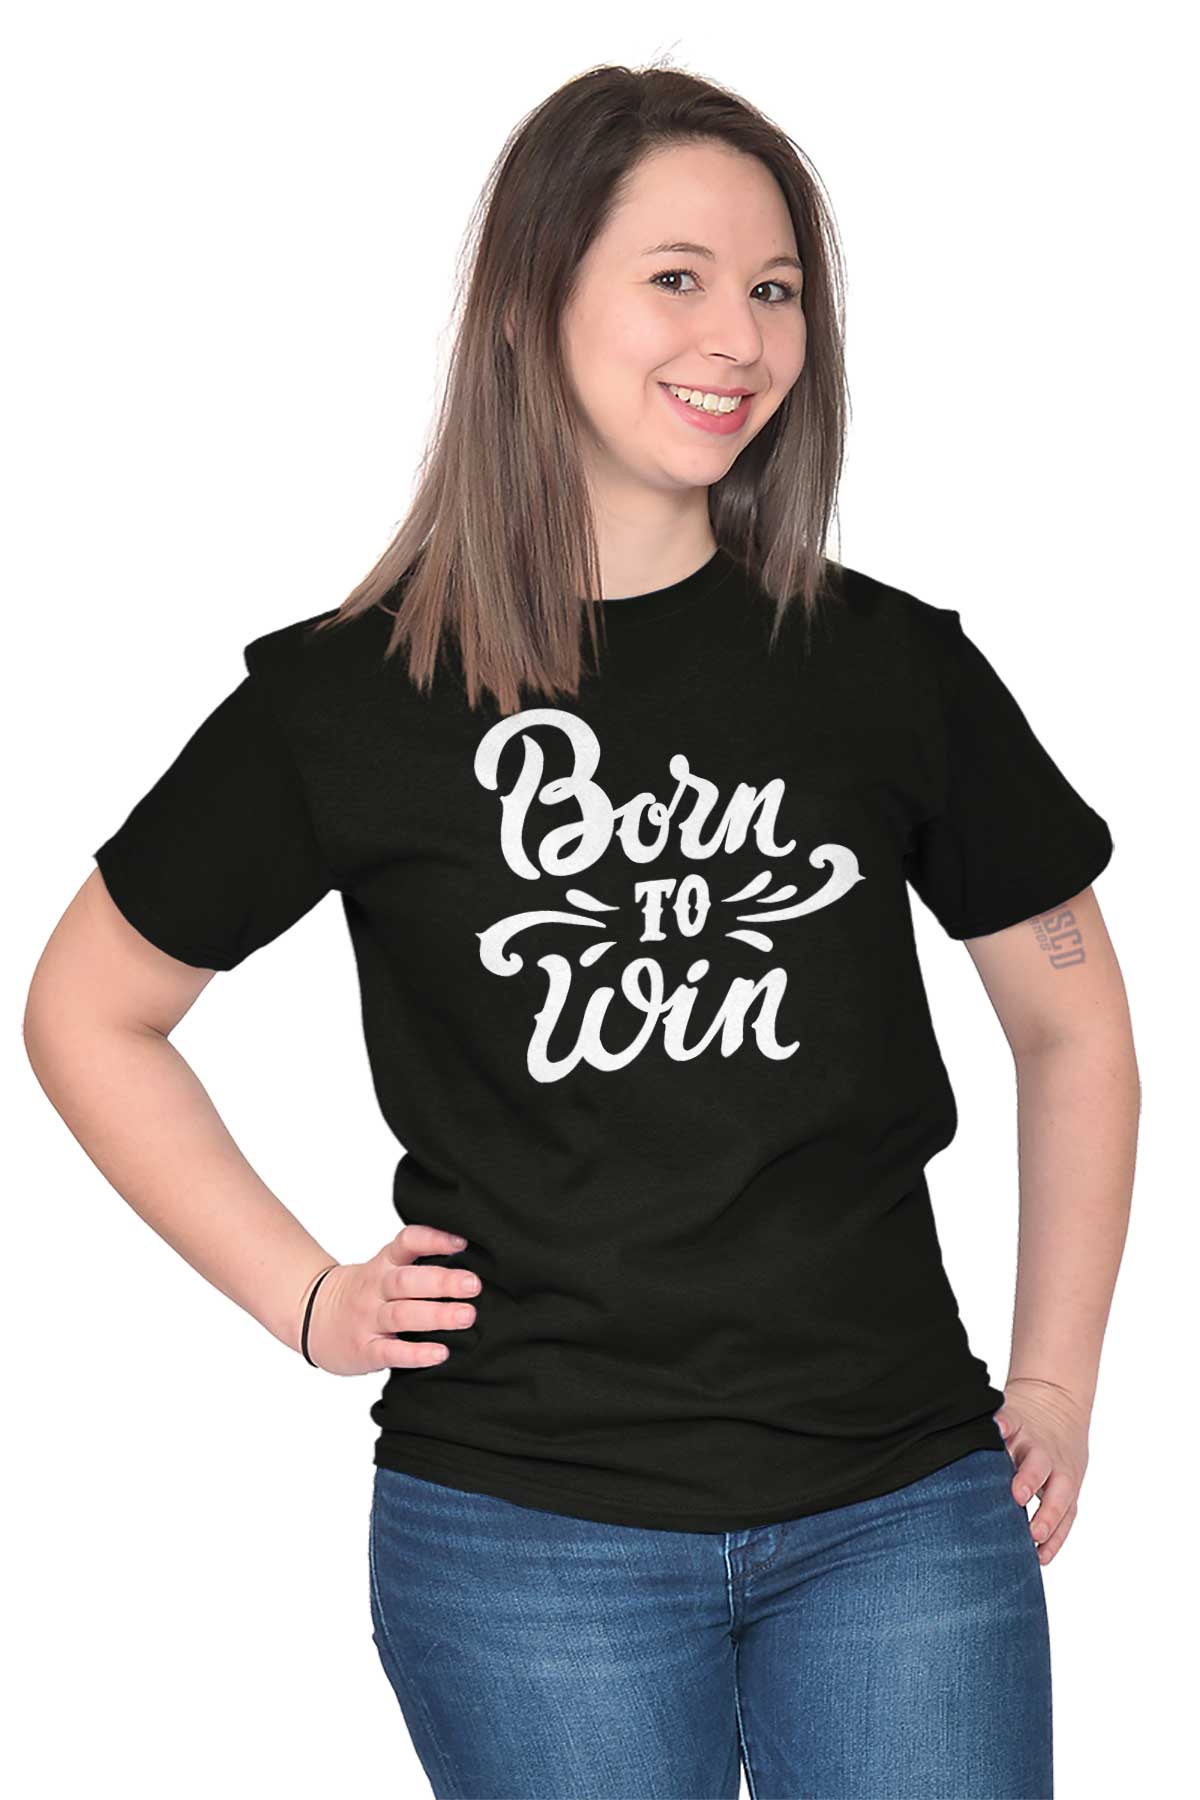 Born To Win Winner Motivation Inspiring Gift T-Shirts Tees Tshirts For ...